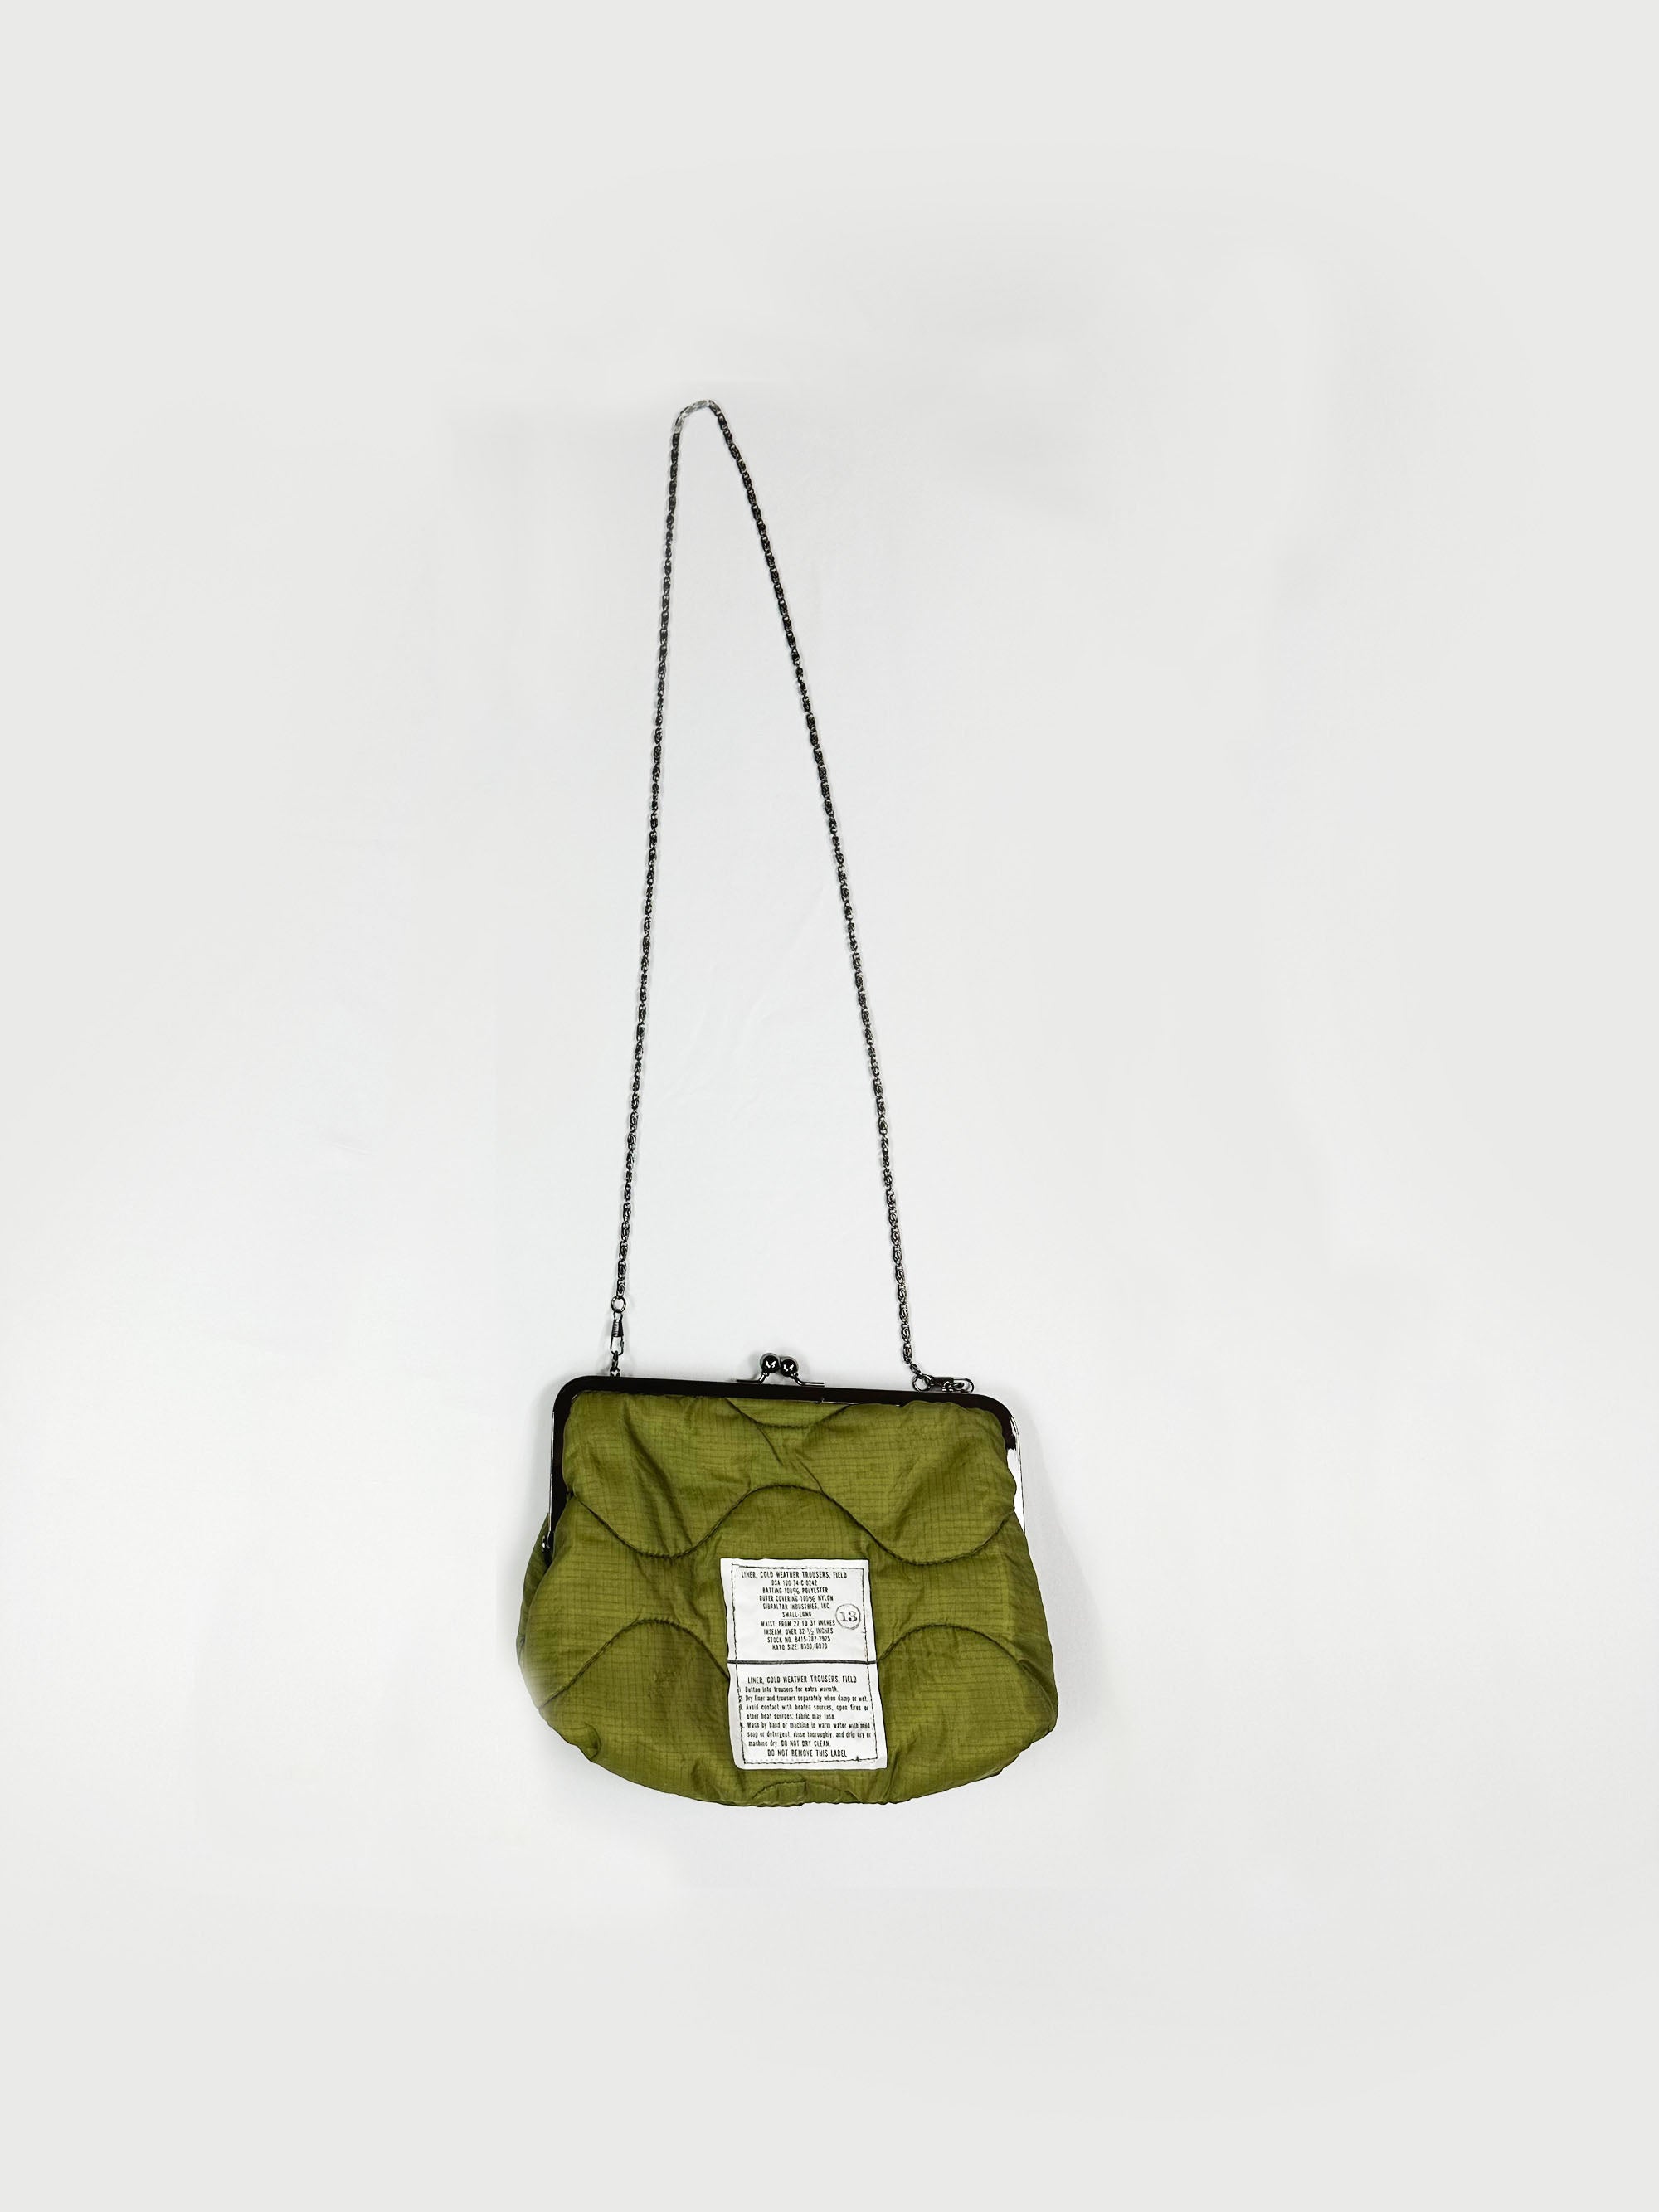 Up cycle liner clasp bag